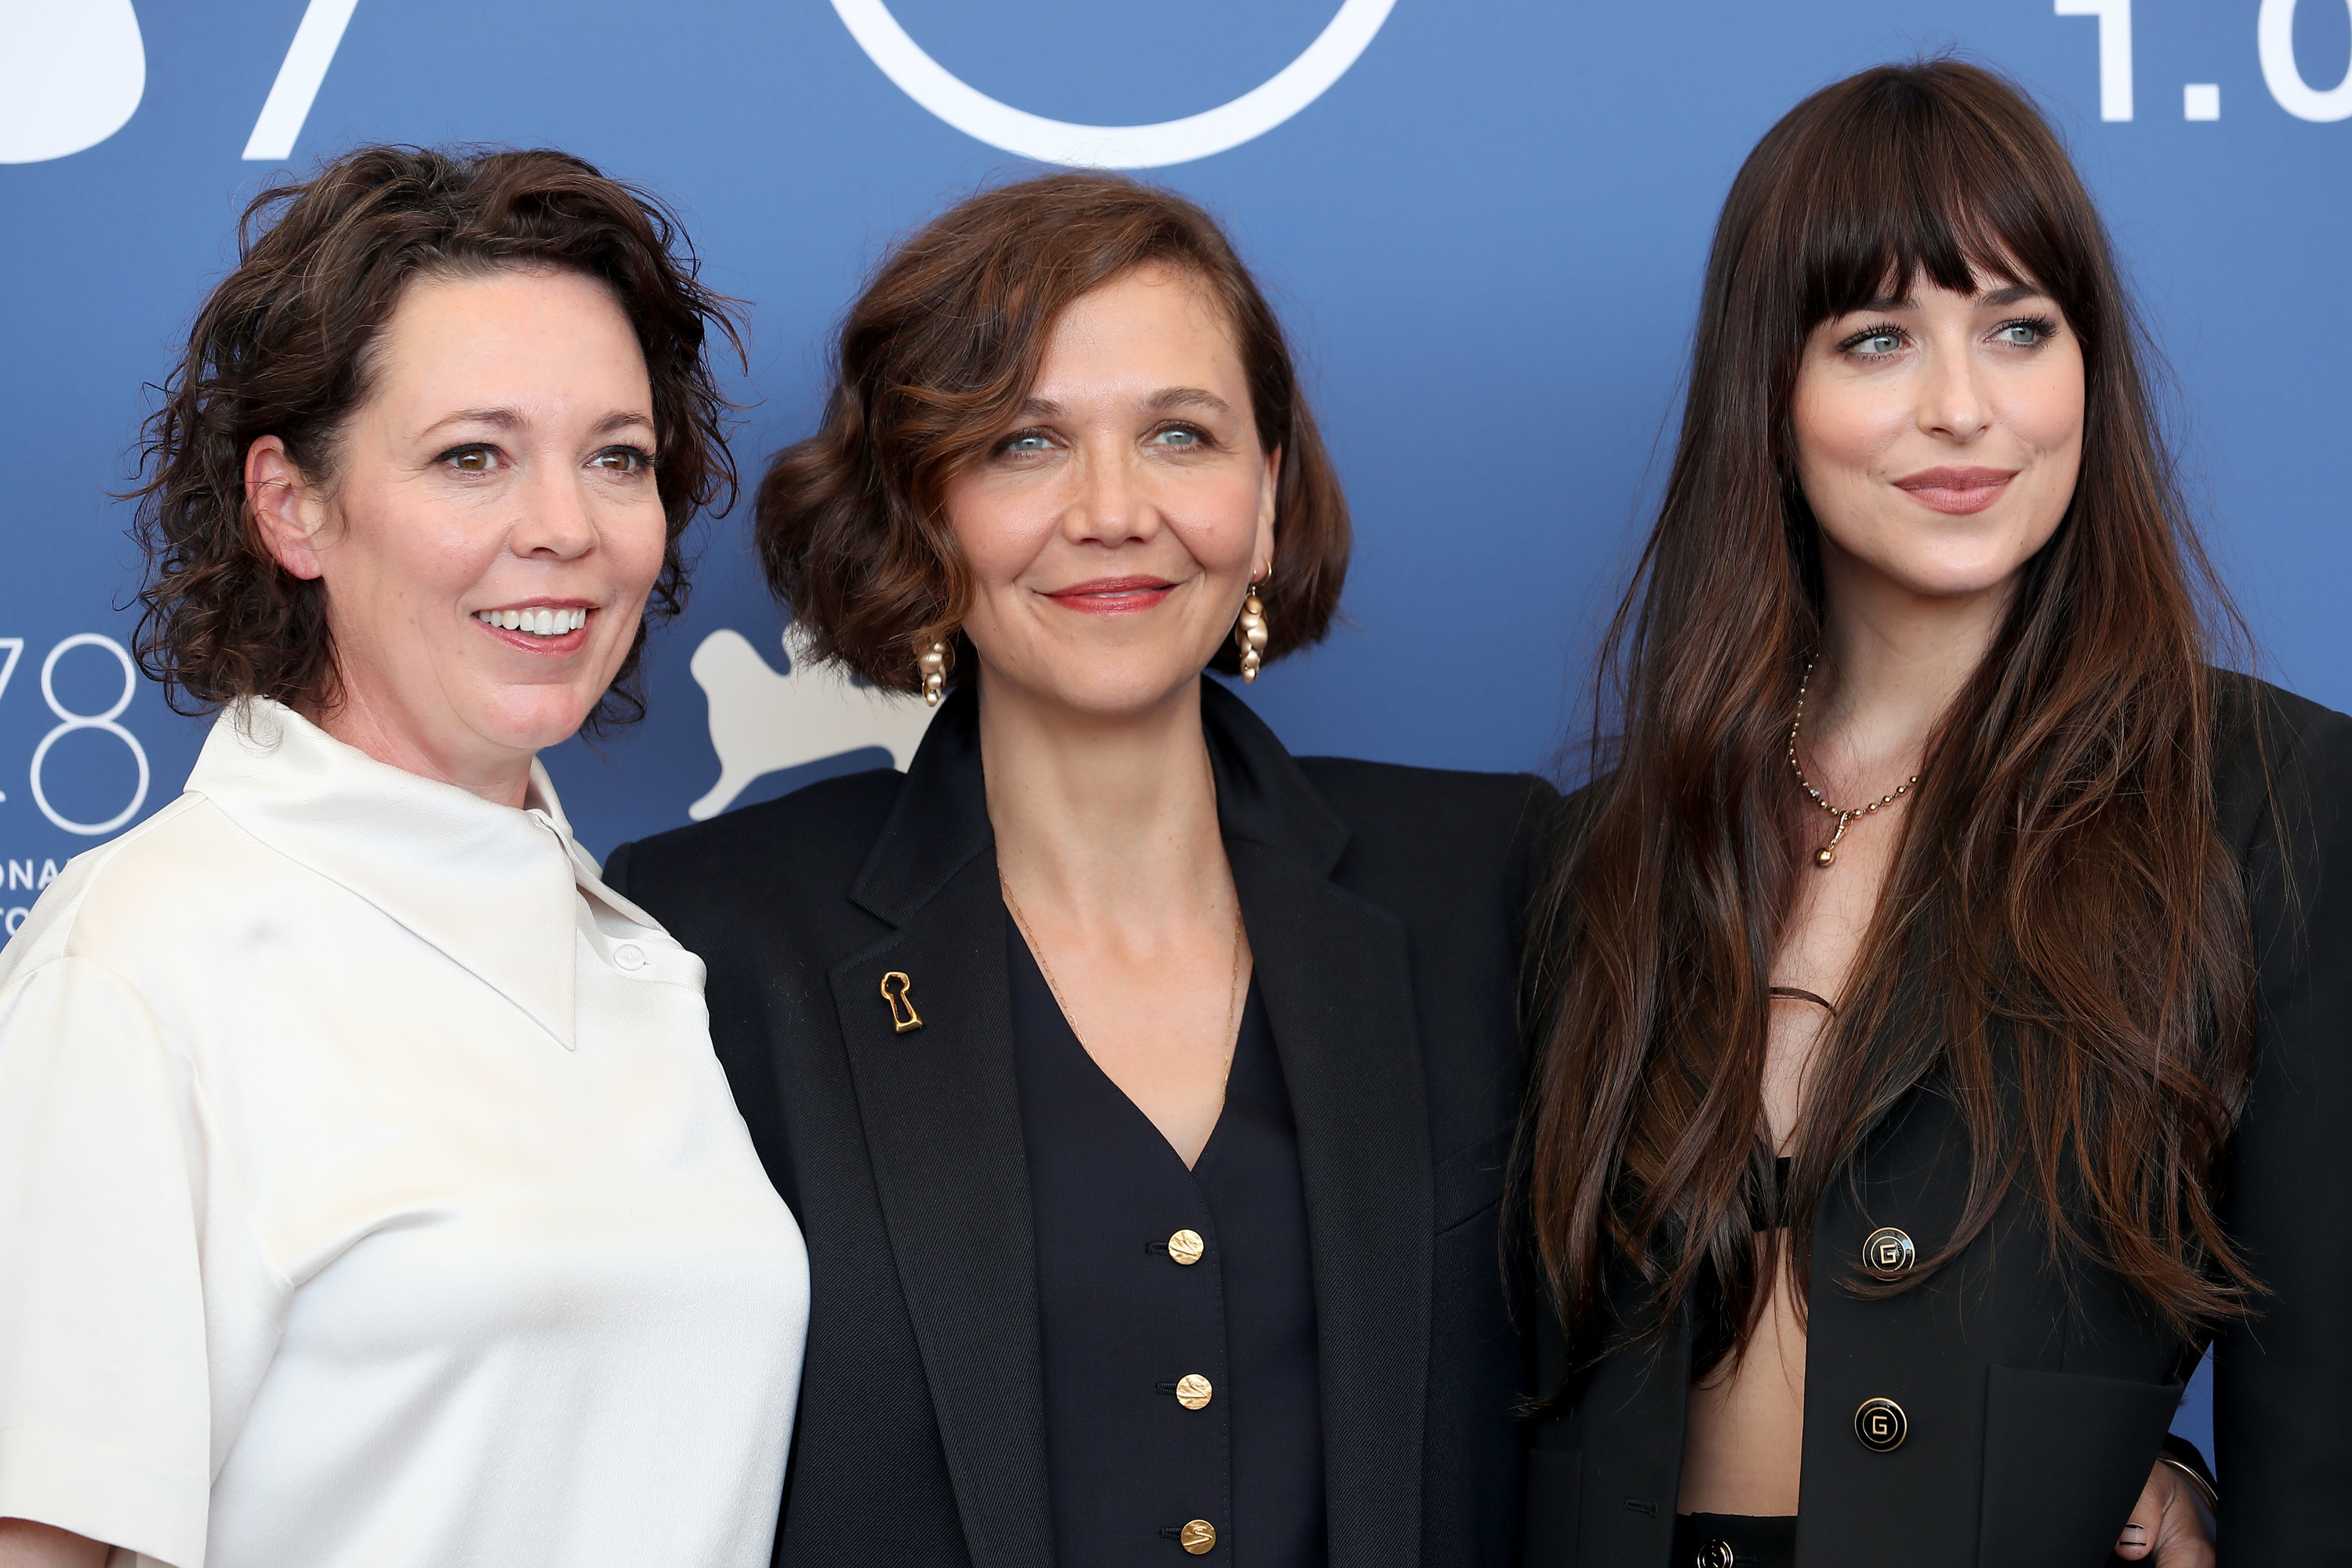 Olivia, Maggie Gyllenhaal, and Dakota pose together on the red carpet